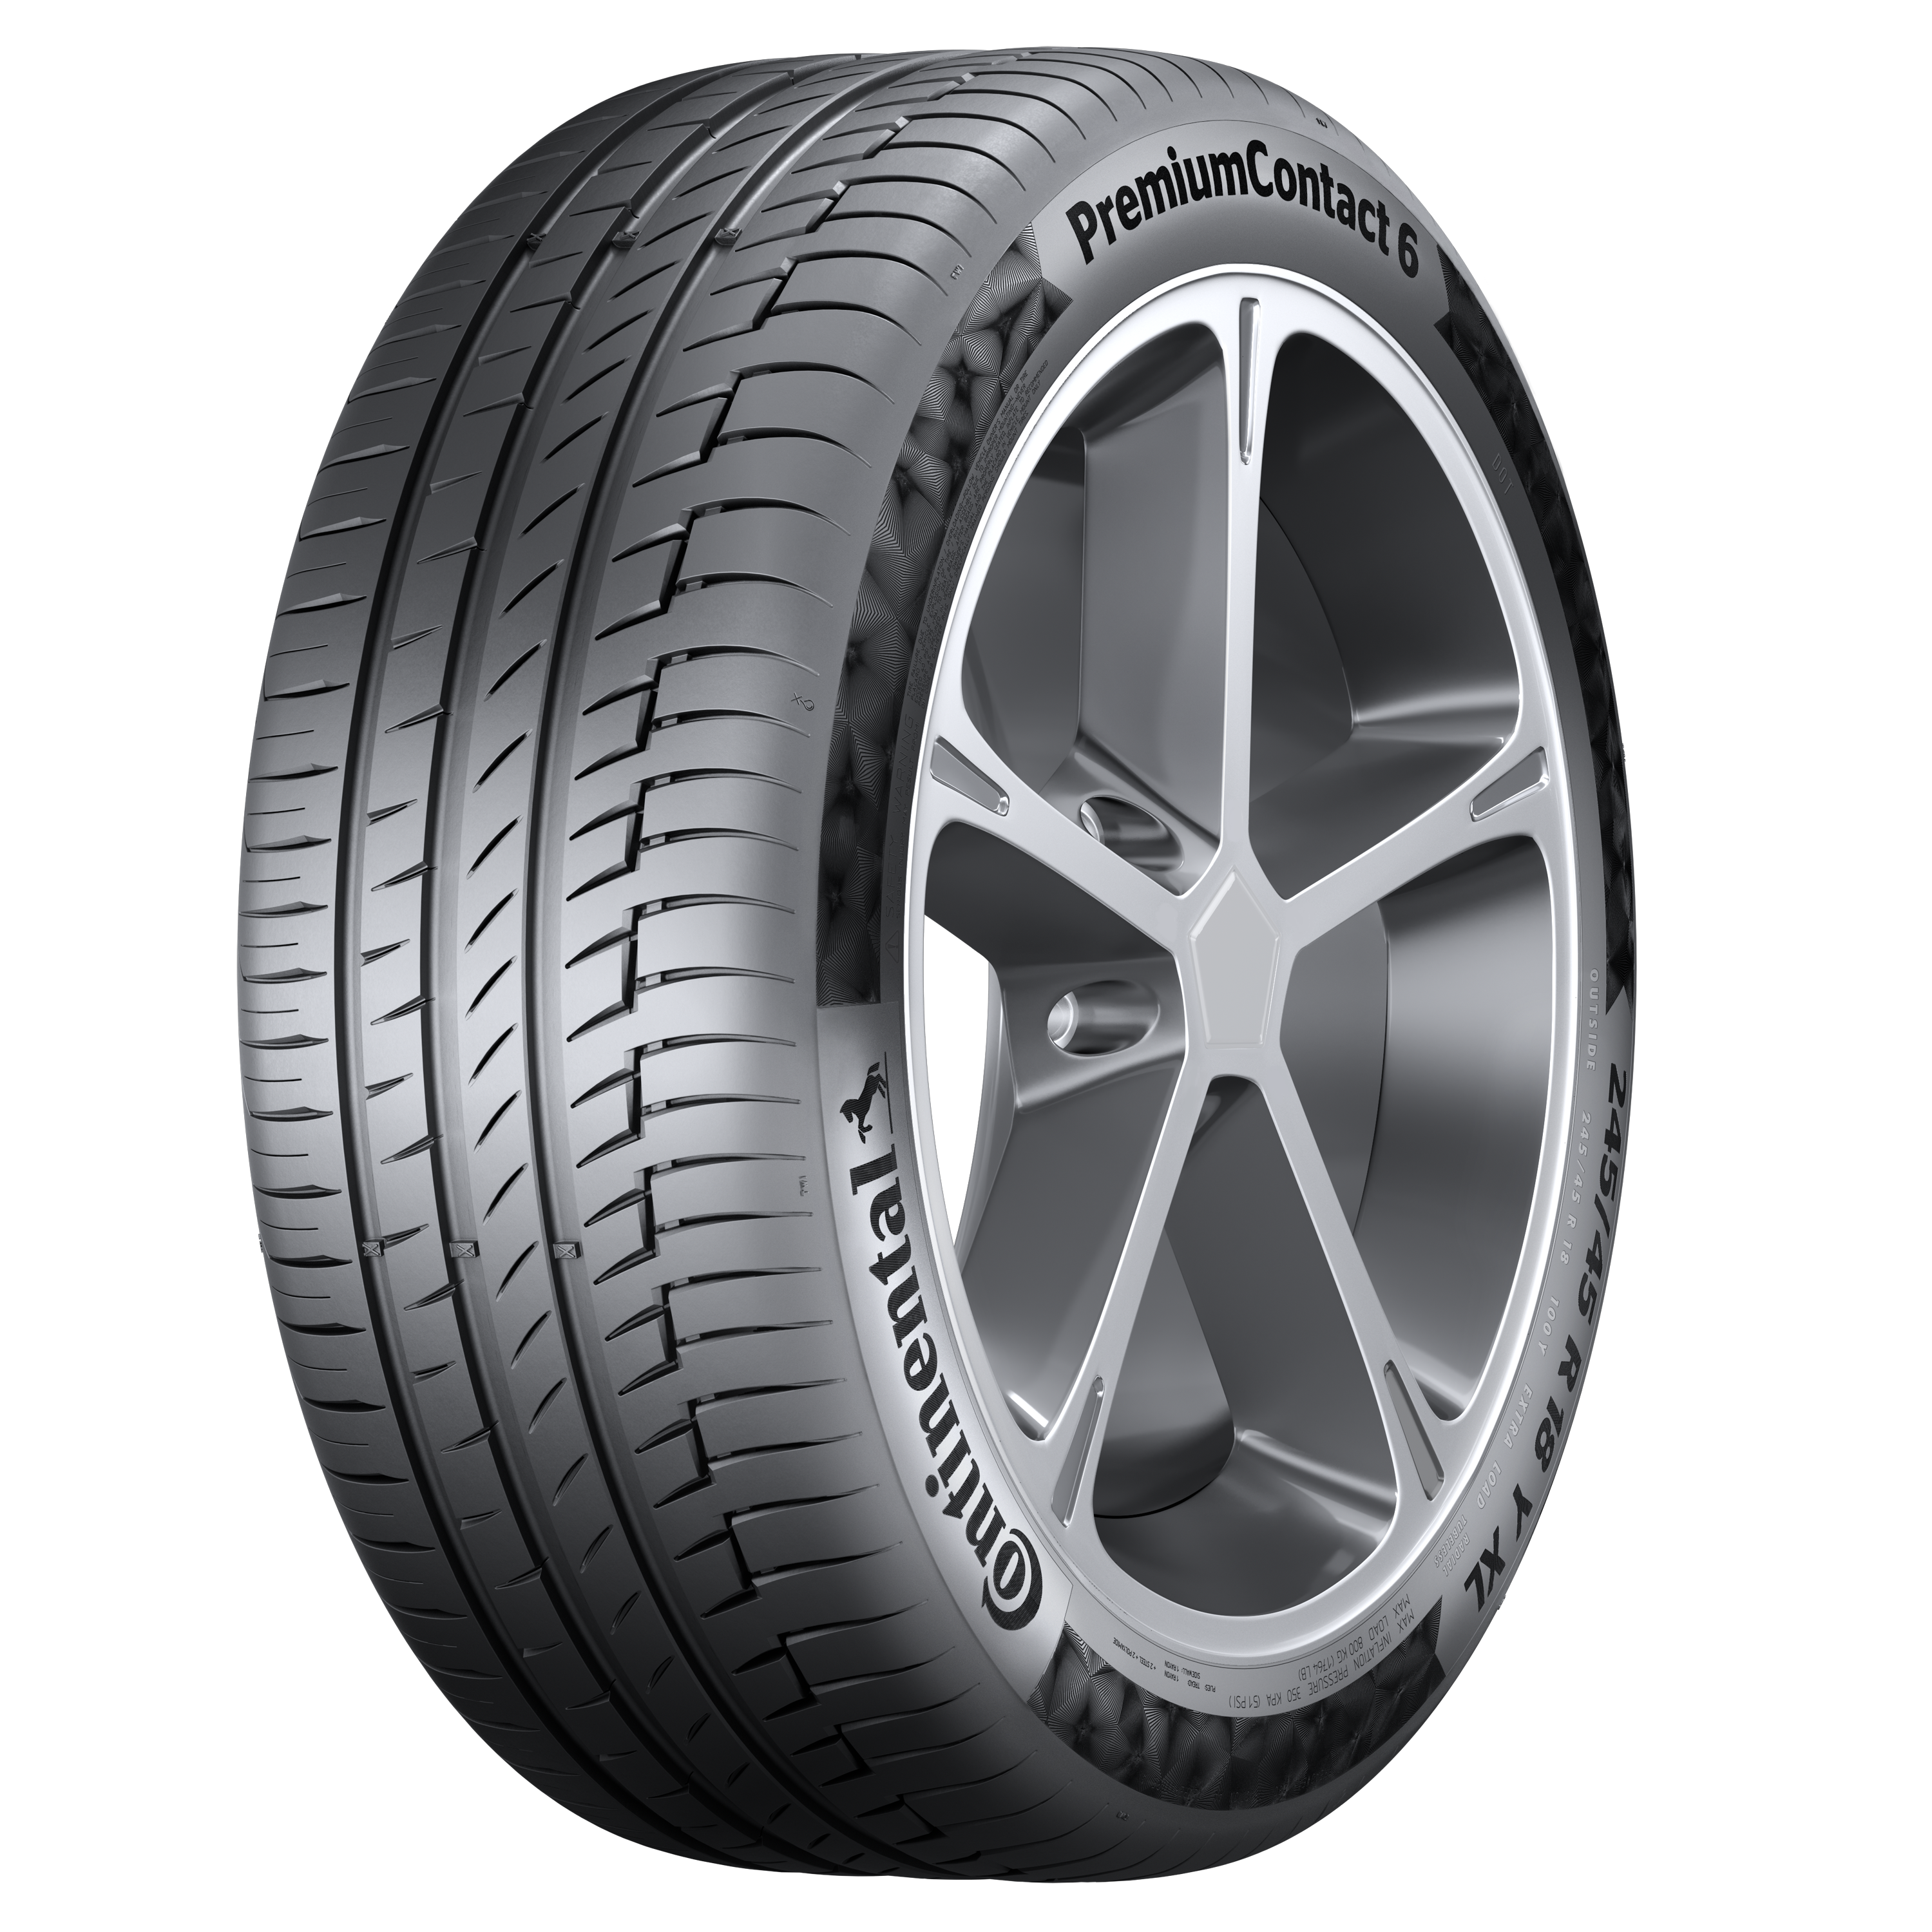 AG Continental Summer Continental from - tires car